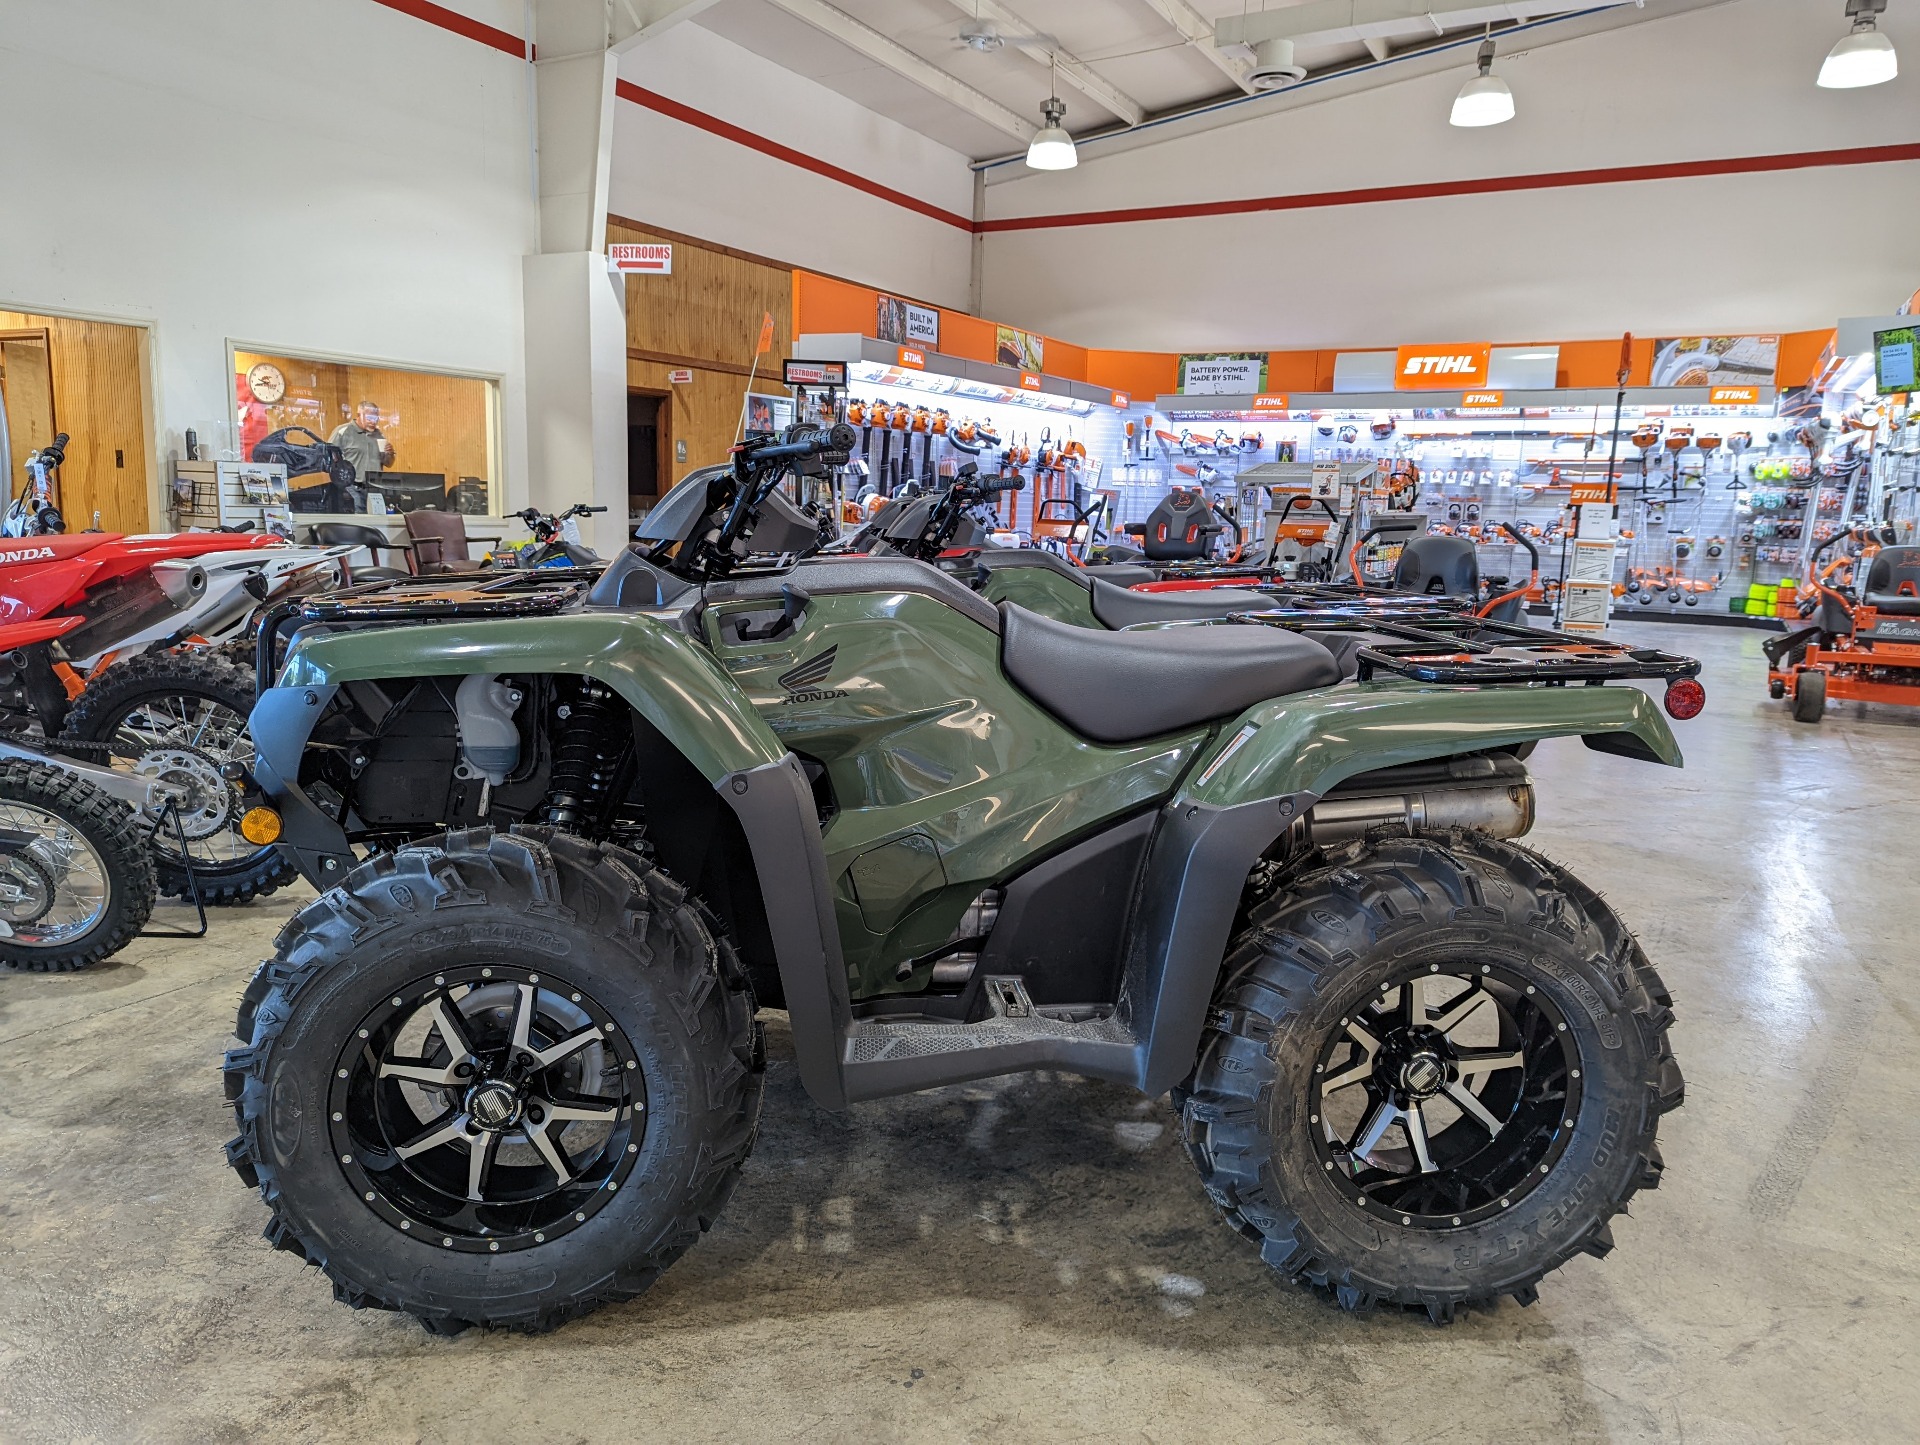 2022 Honda FourTrax Rancher 4x4 in Winchester, Tennessee - Photo 1